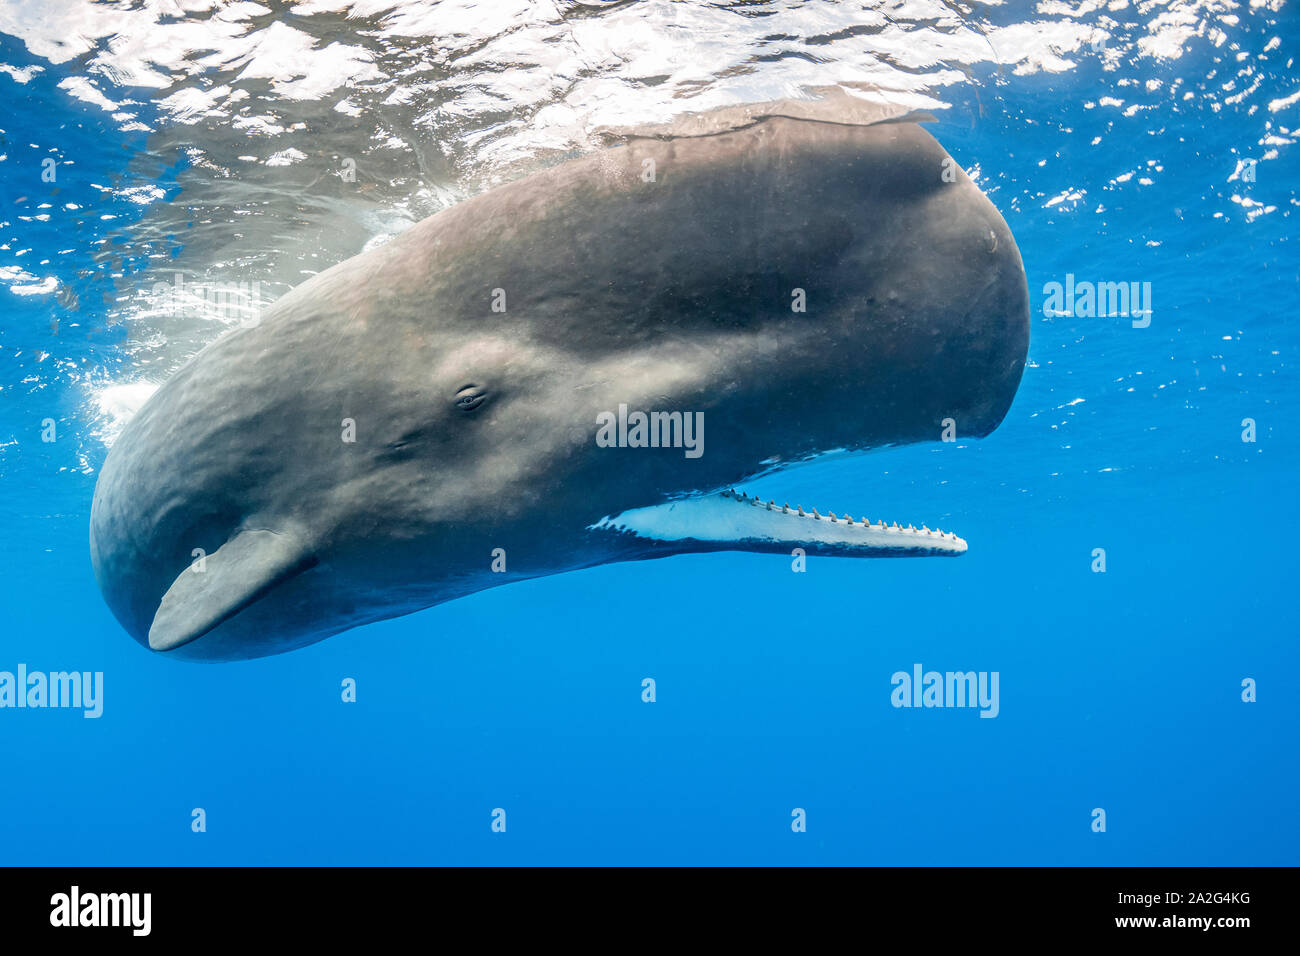 Sperm whale, Physeter macrocephalus, with open mouth, showing the teeth The sperm whale is the largest of the toothed whales Sperm whales are known to Stock Photo